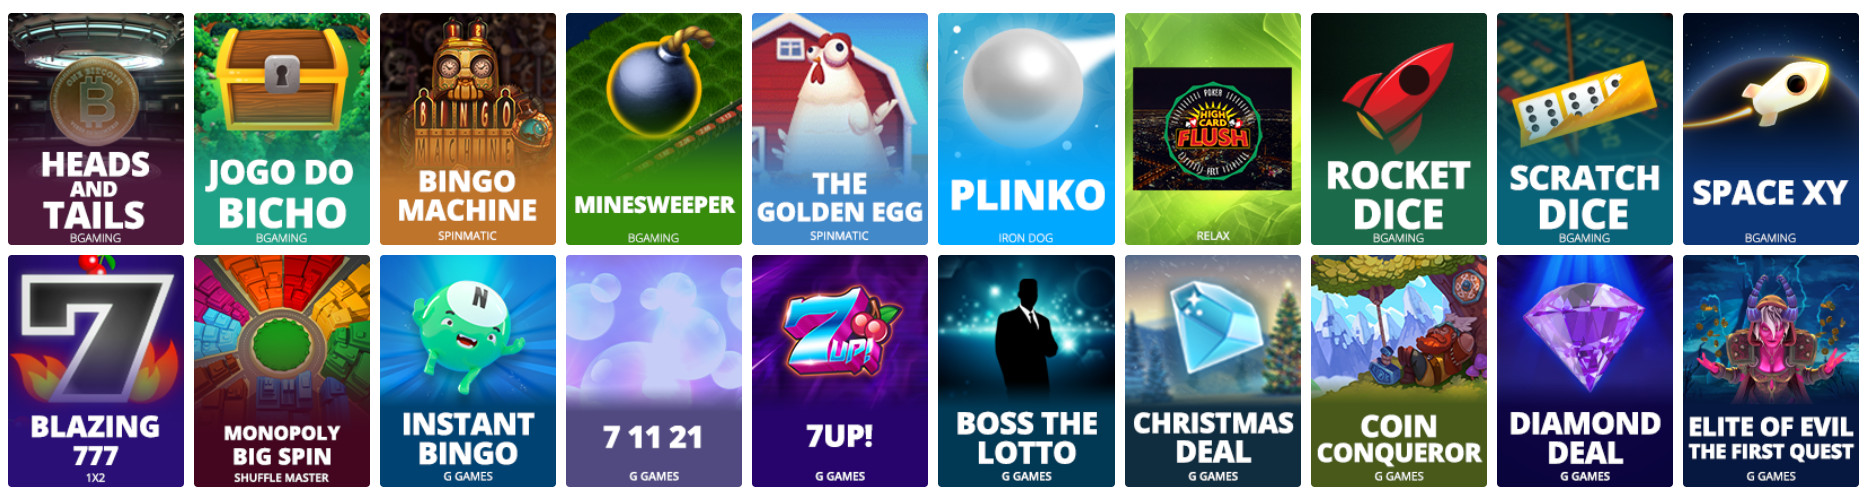 Special Games Section at Lapalingo Casino